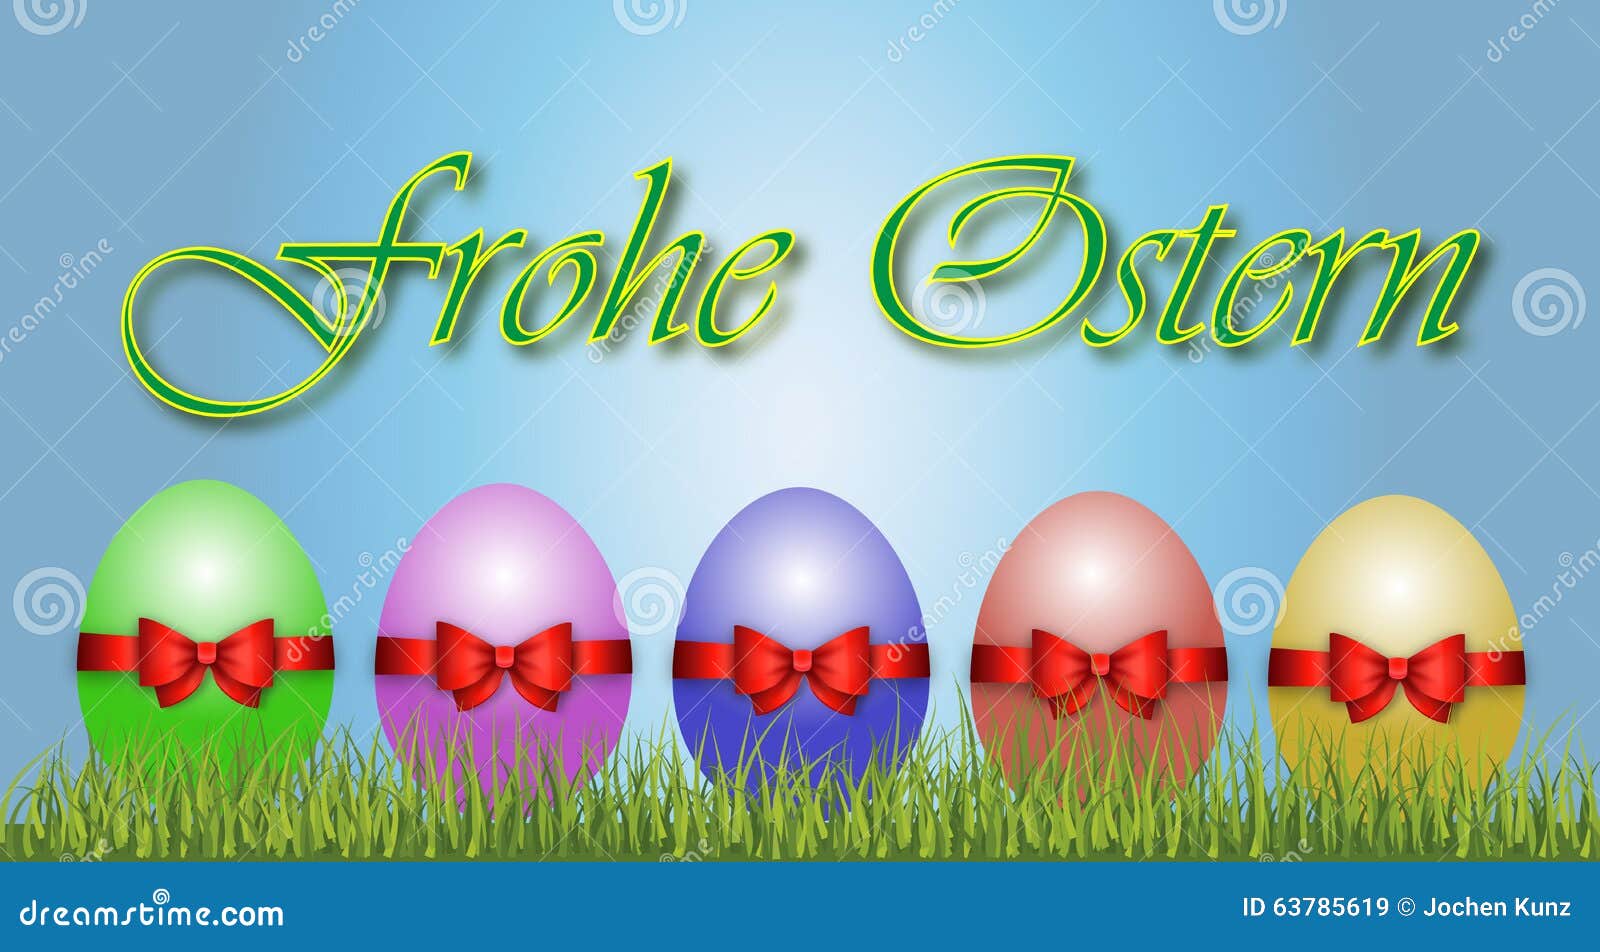 easter decoration clipart - photo #44